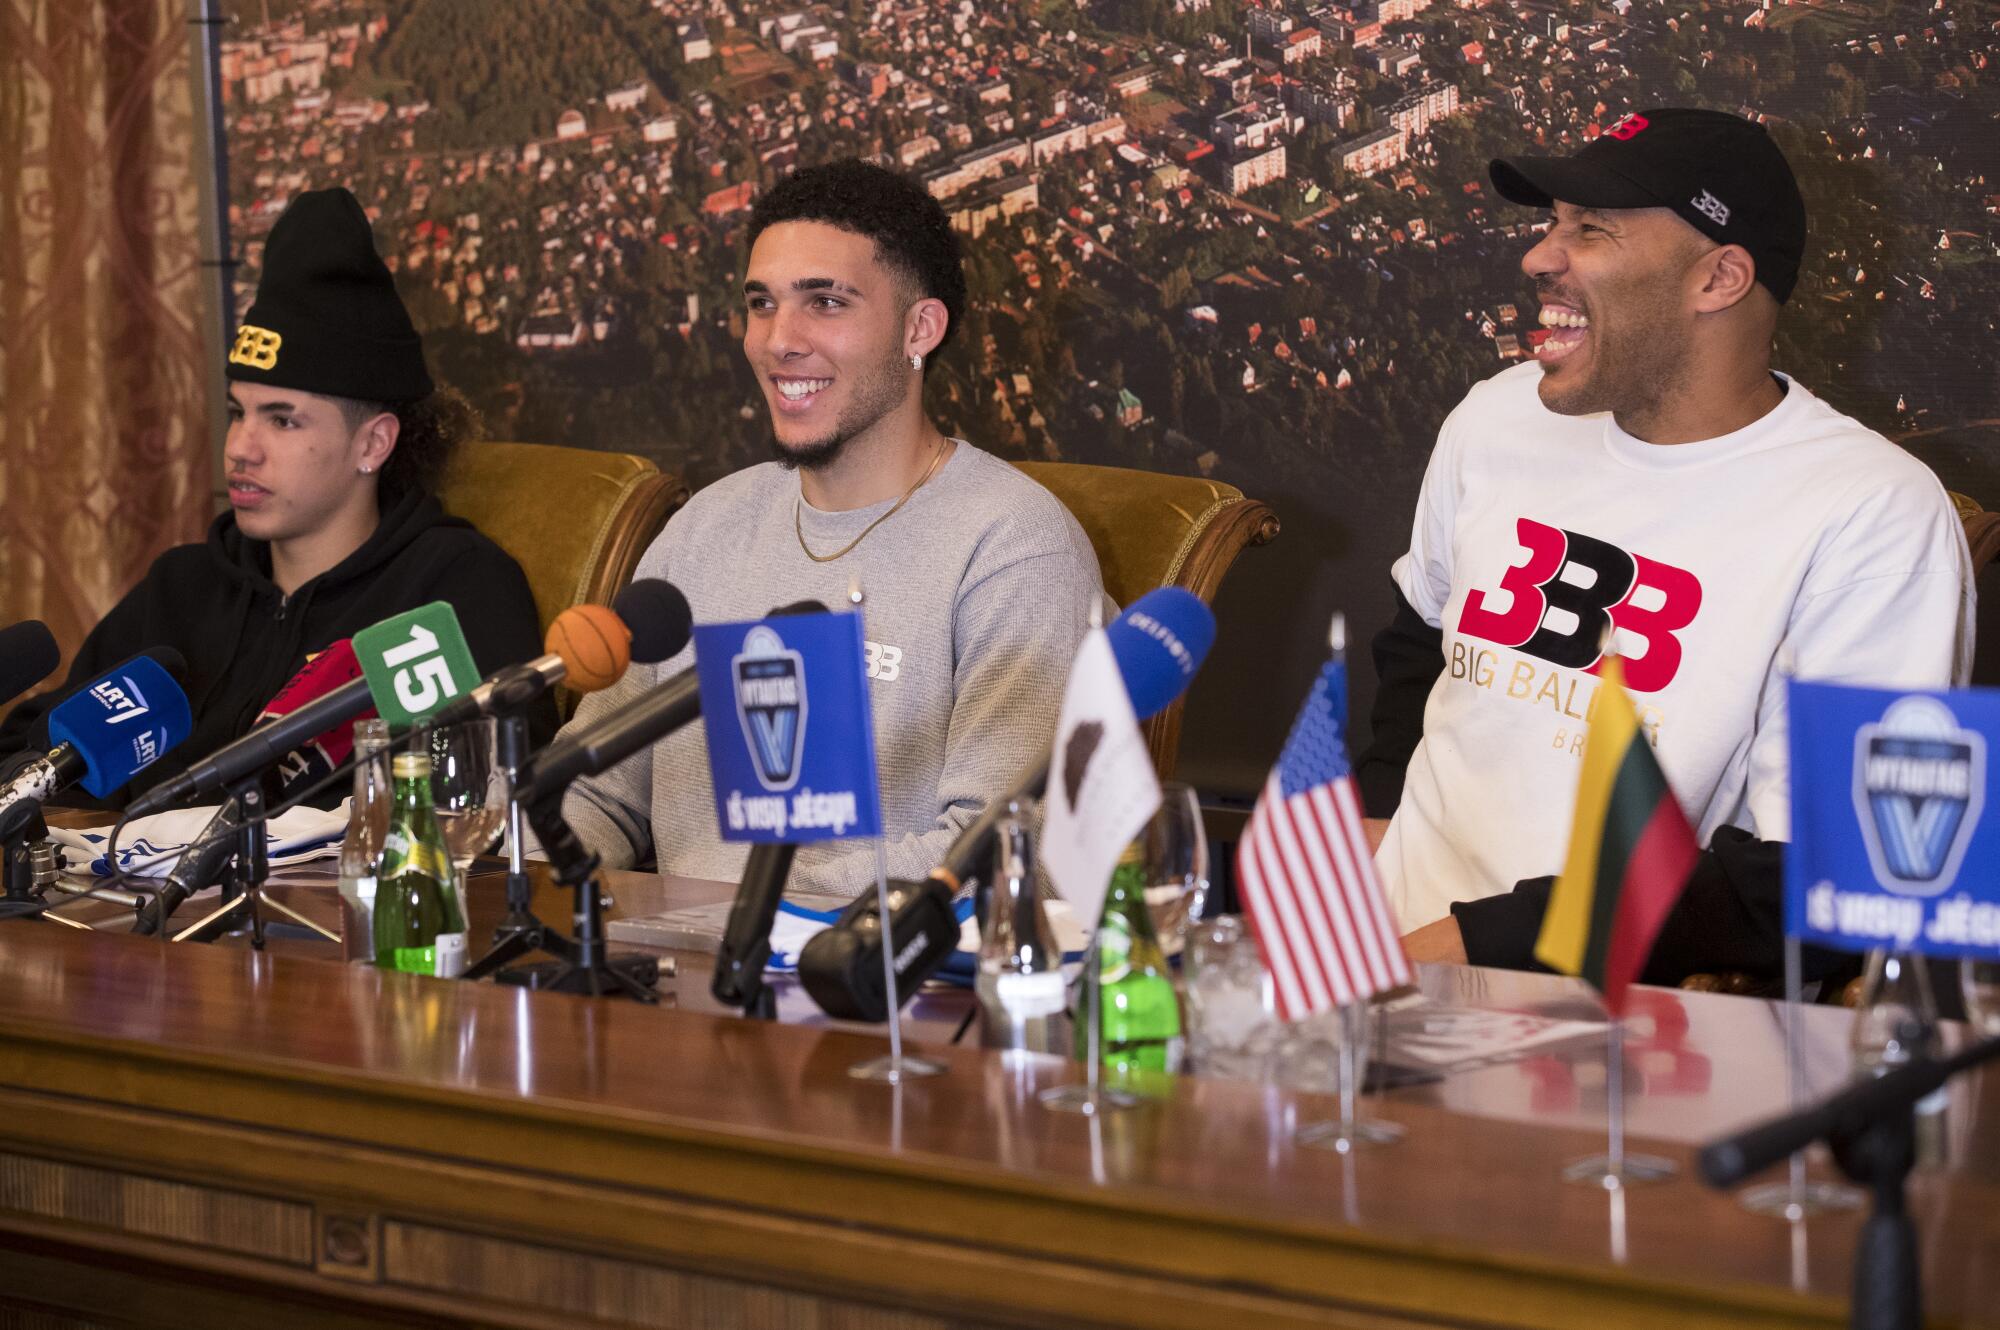 LaVar Ball joins sons LiAngelo Ball (center) and LaMelo Ball during a news conference with a club team in Lithuania.